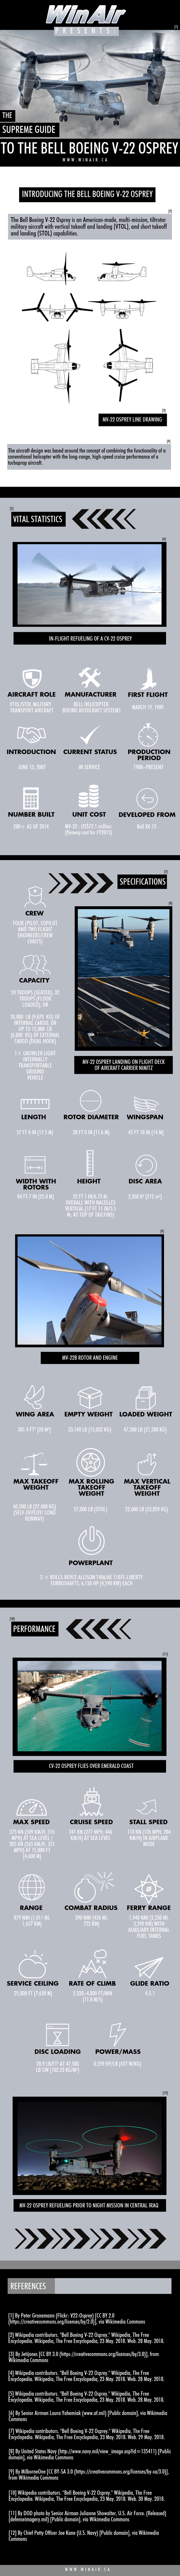 The Supreme Guide to the Bell Boeing V-22 Osprey - Infographic Image